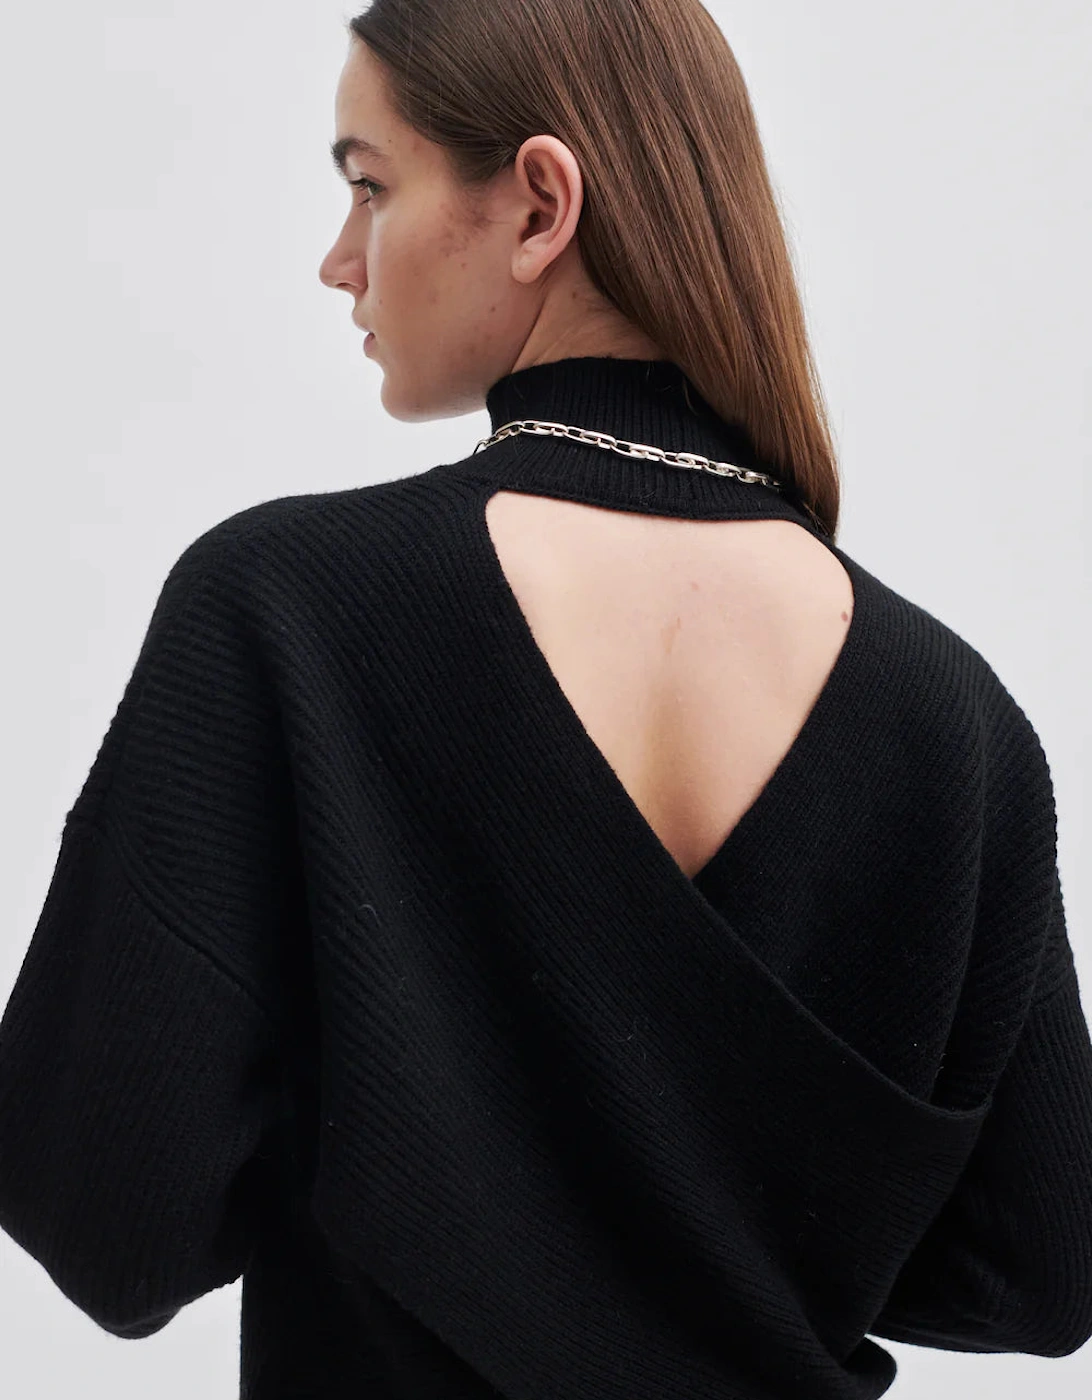 Ysamil merino and cashmere knit